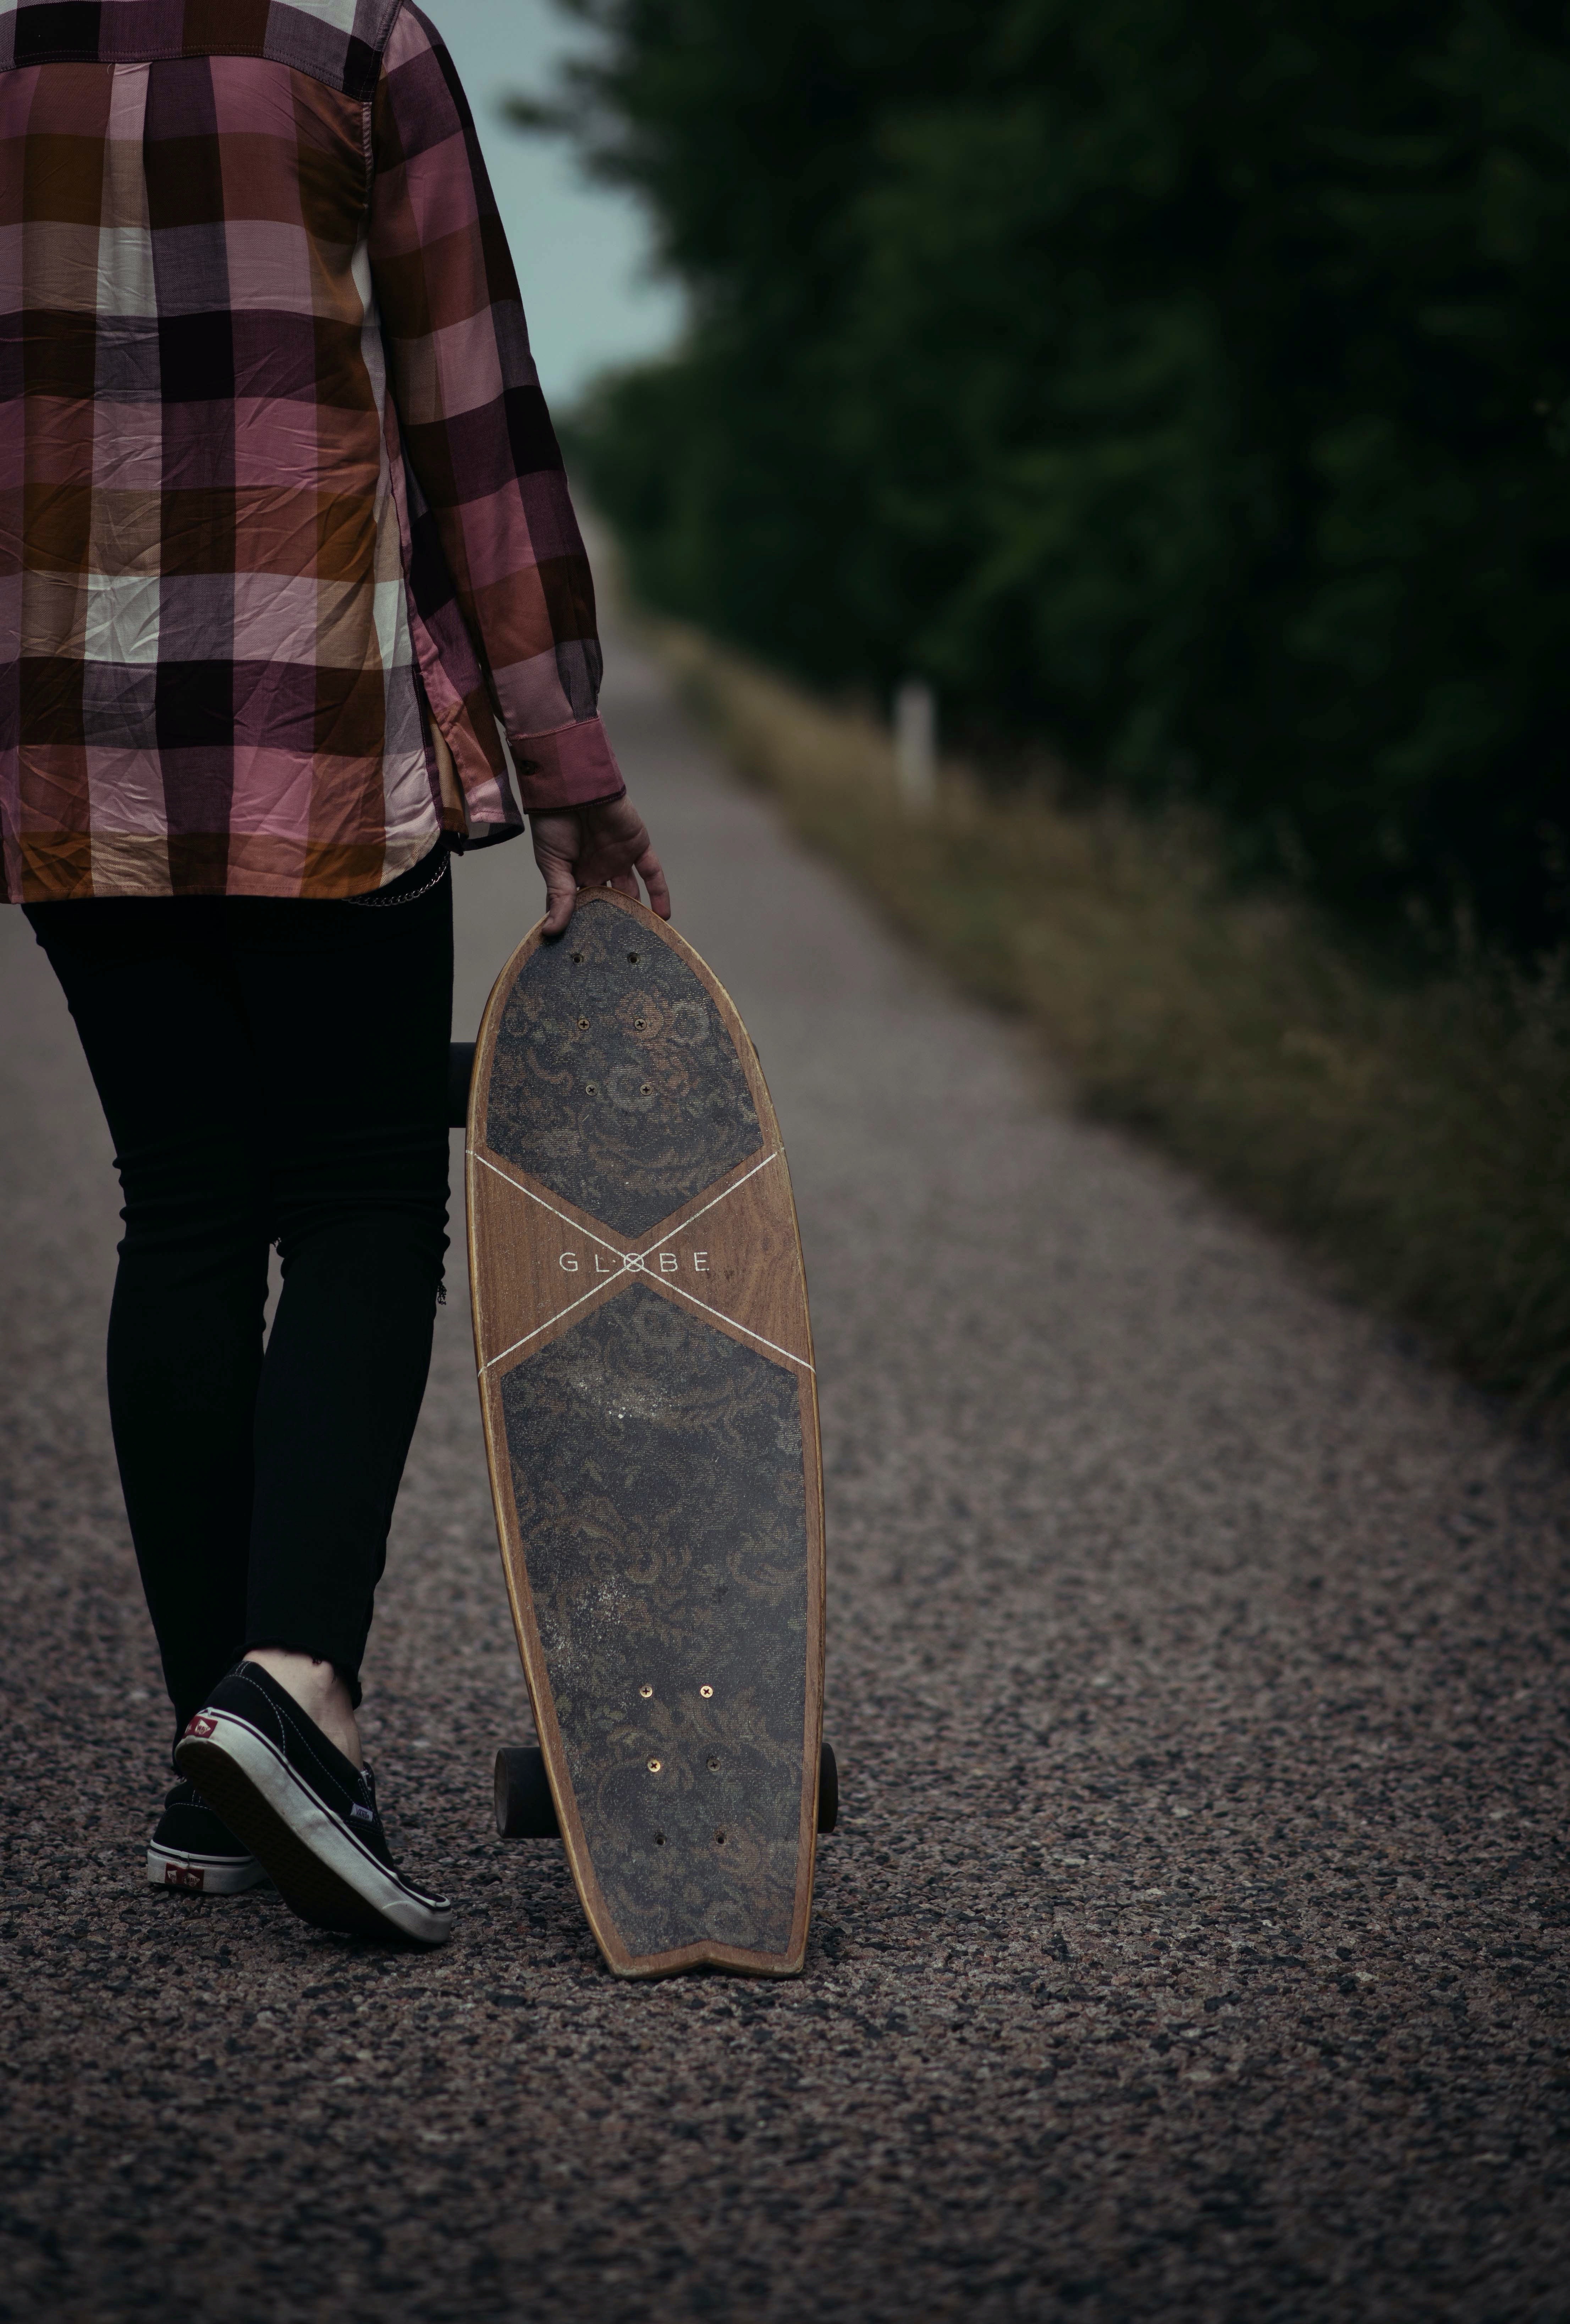 hipster, miscellanea, miscellaneous, sneakers, style, human, person, shoes, longboard